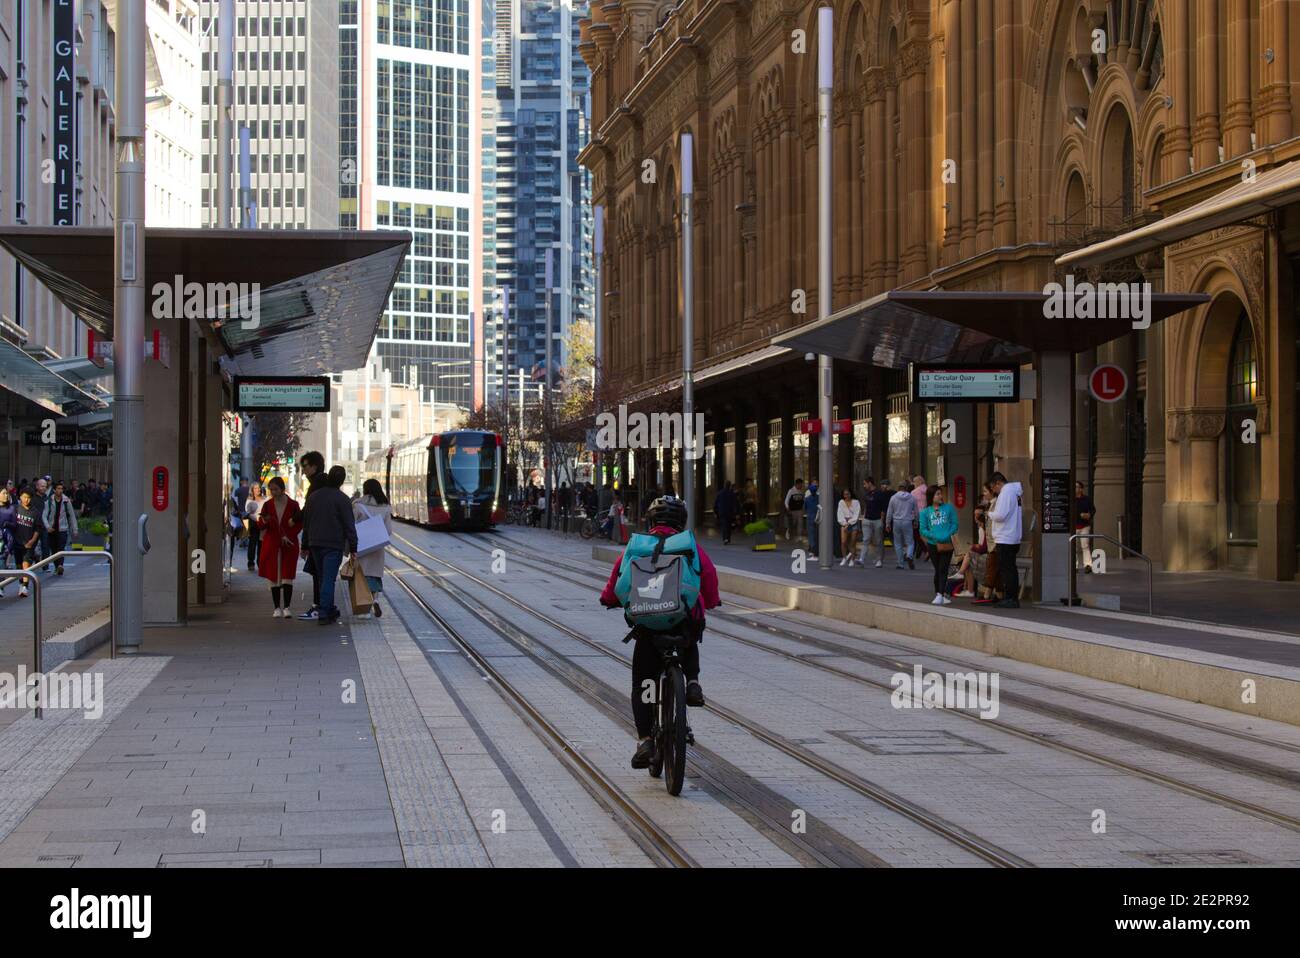 Food delivery driver on a bicycle operating illegally on tram tracks Sydney Australia Stock Photo